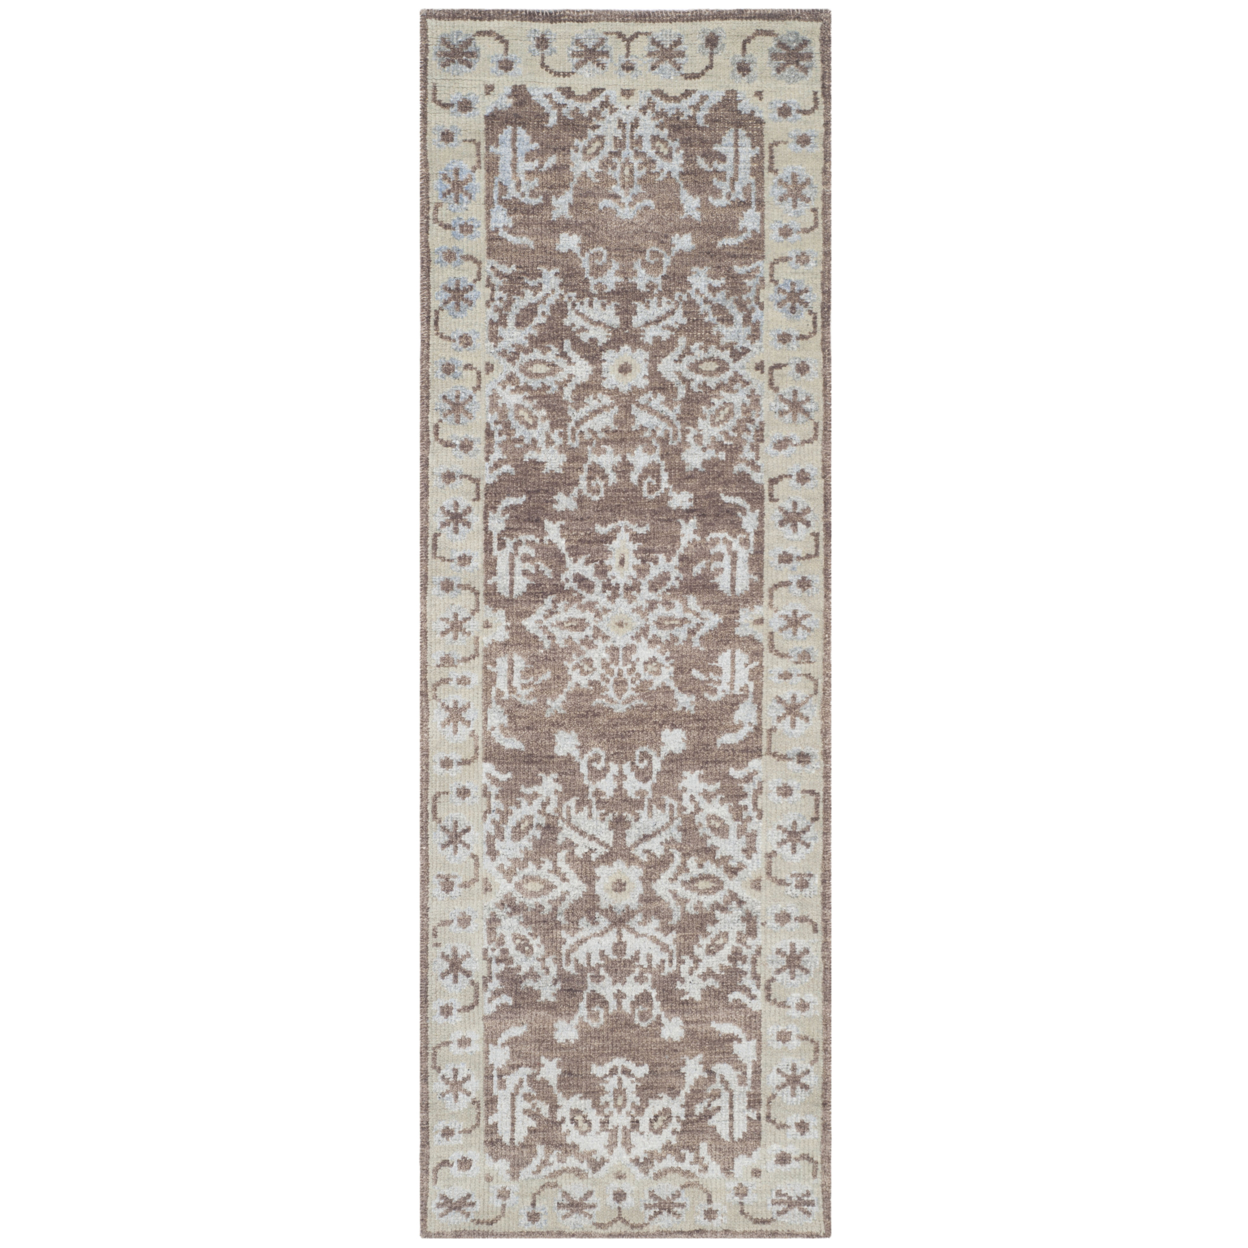 SAFAVIEH Stone Wash STW216A Hand-knotted Charcoal Rug - 8' X 10'